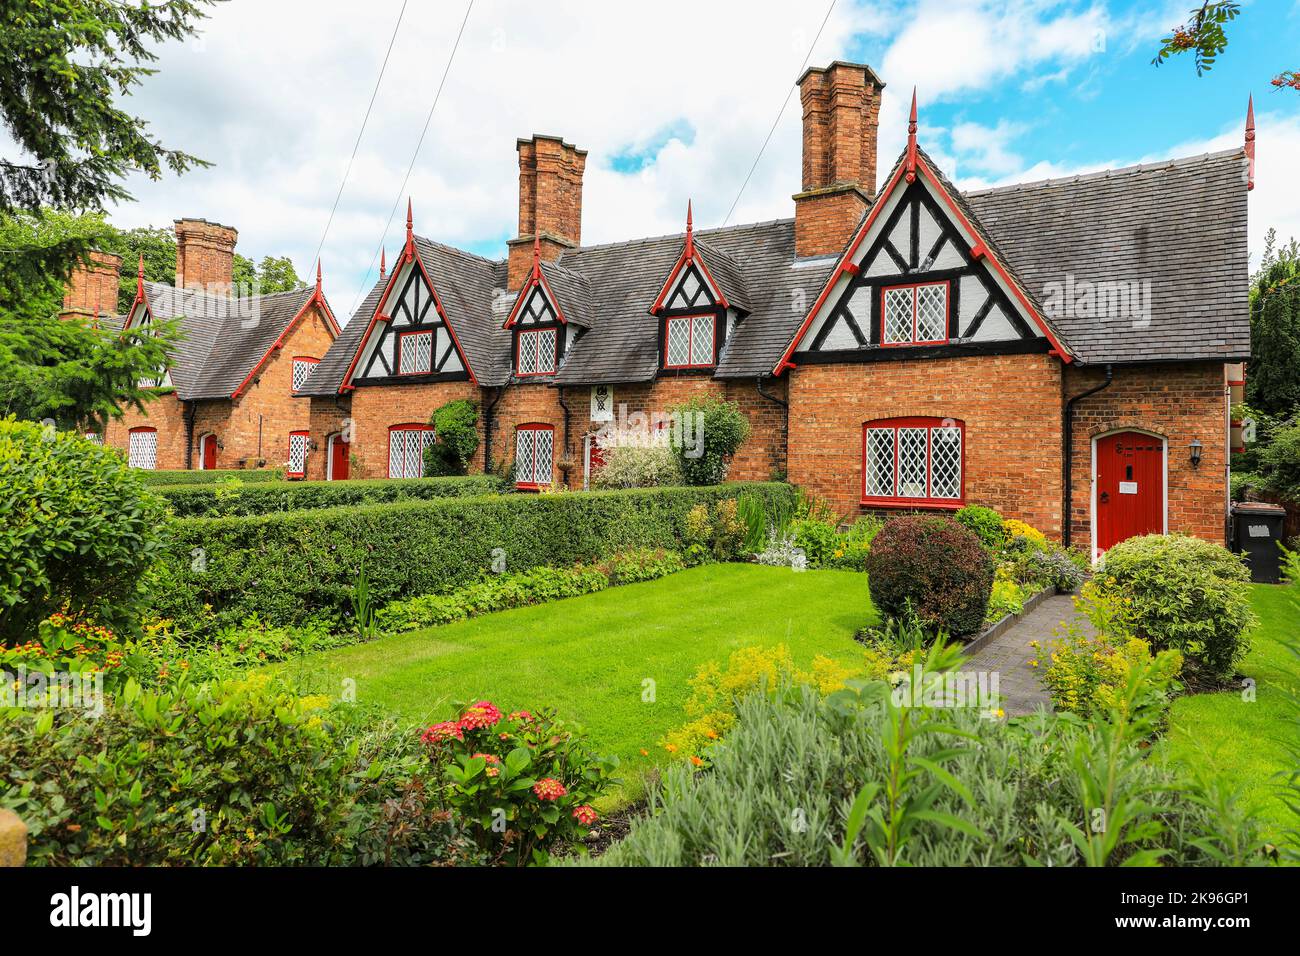 The Tollemache Almshouses, Wilbraham's Almshouses, Wilbraham Almshouses or Welsh Row Almshouses in Nantwich, Cheshire, England, UK Stock Photo